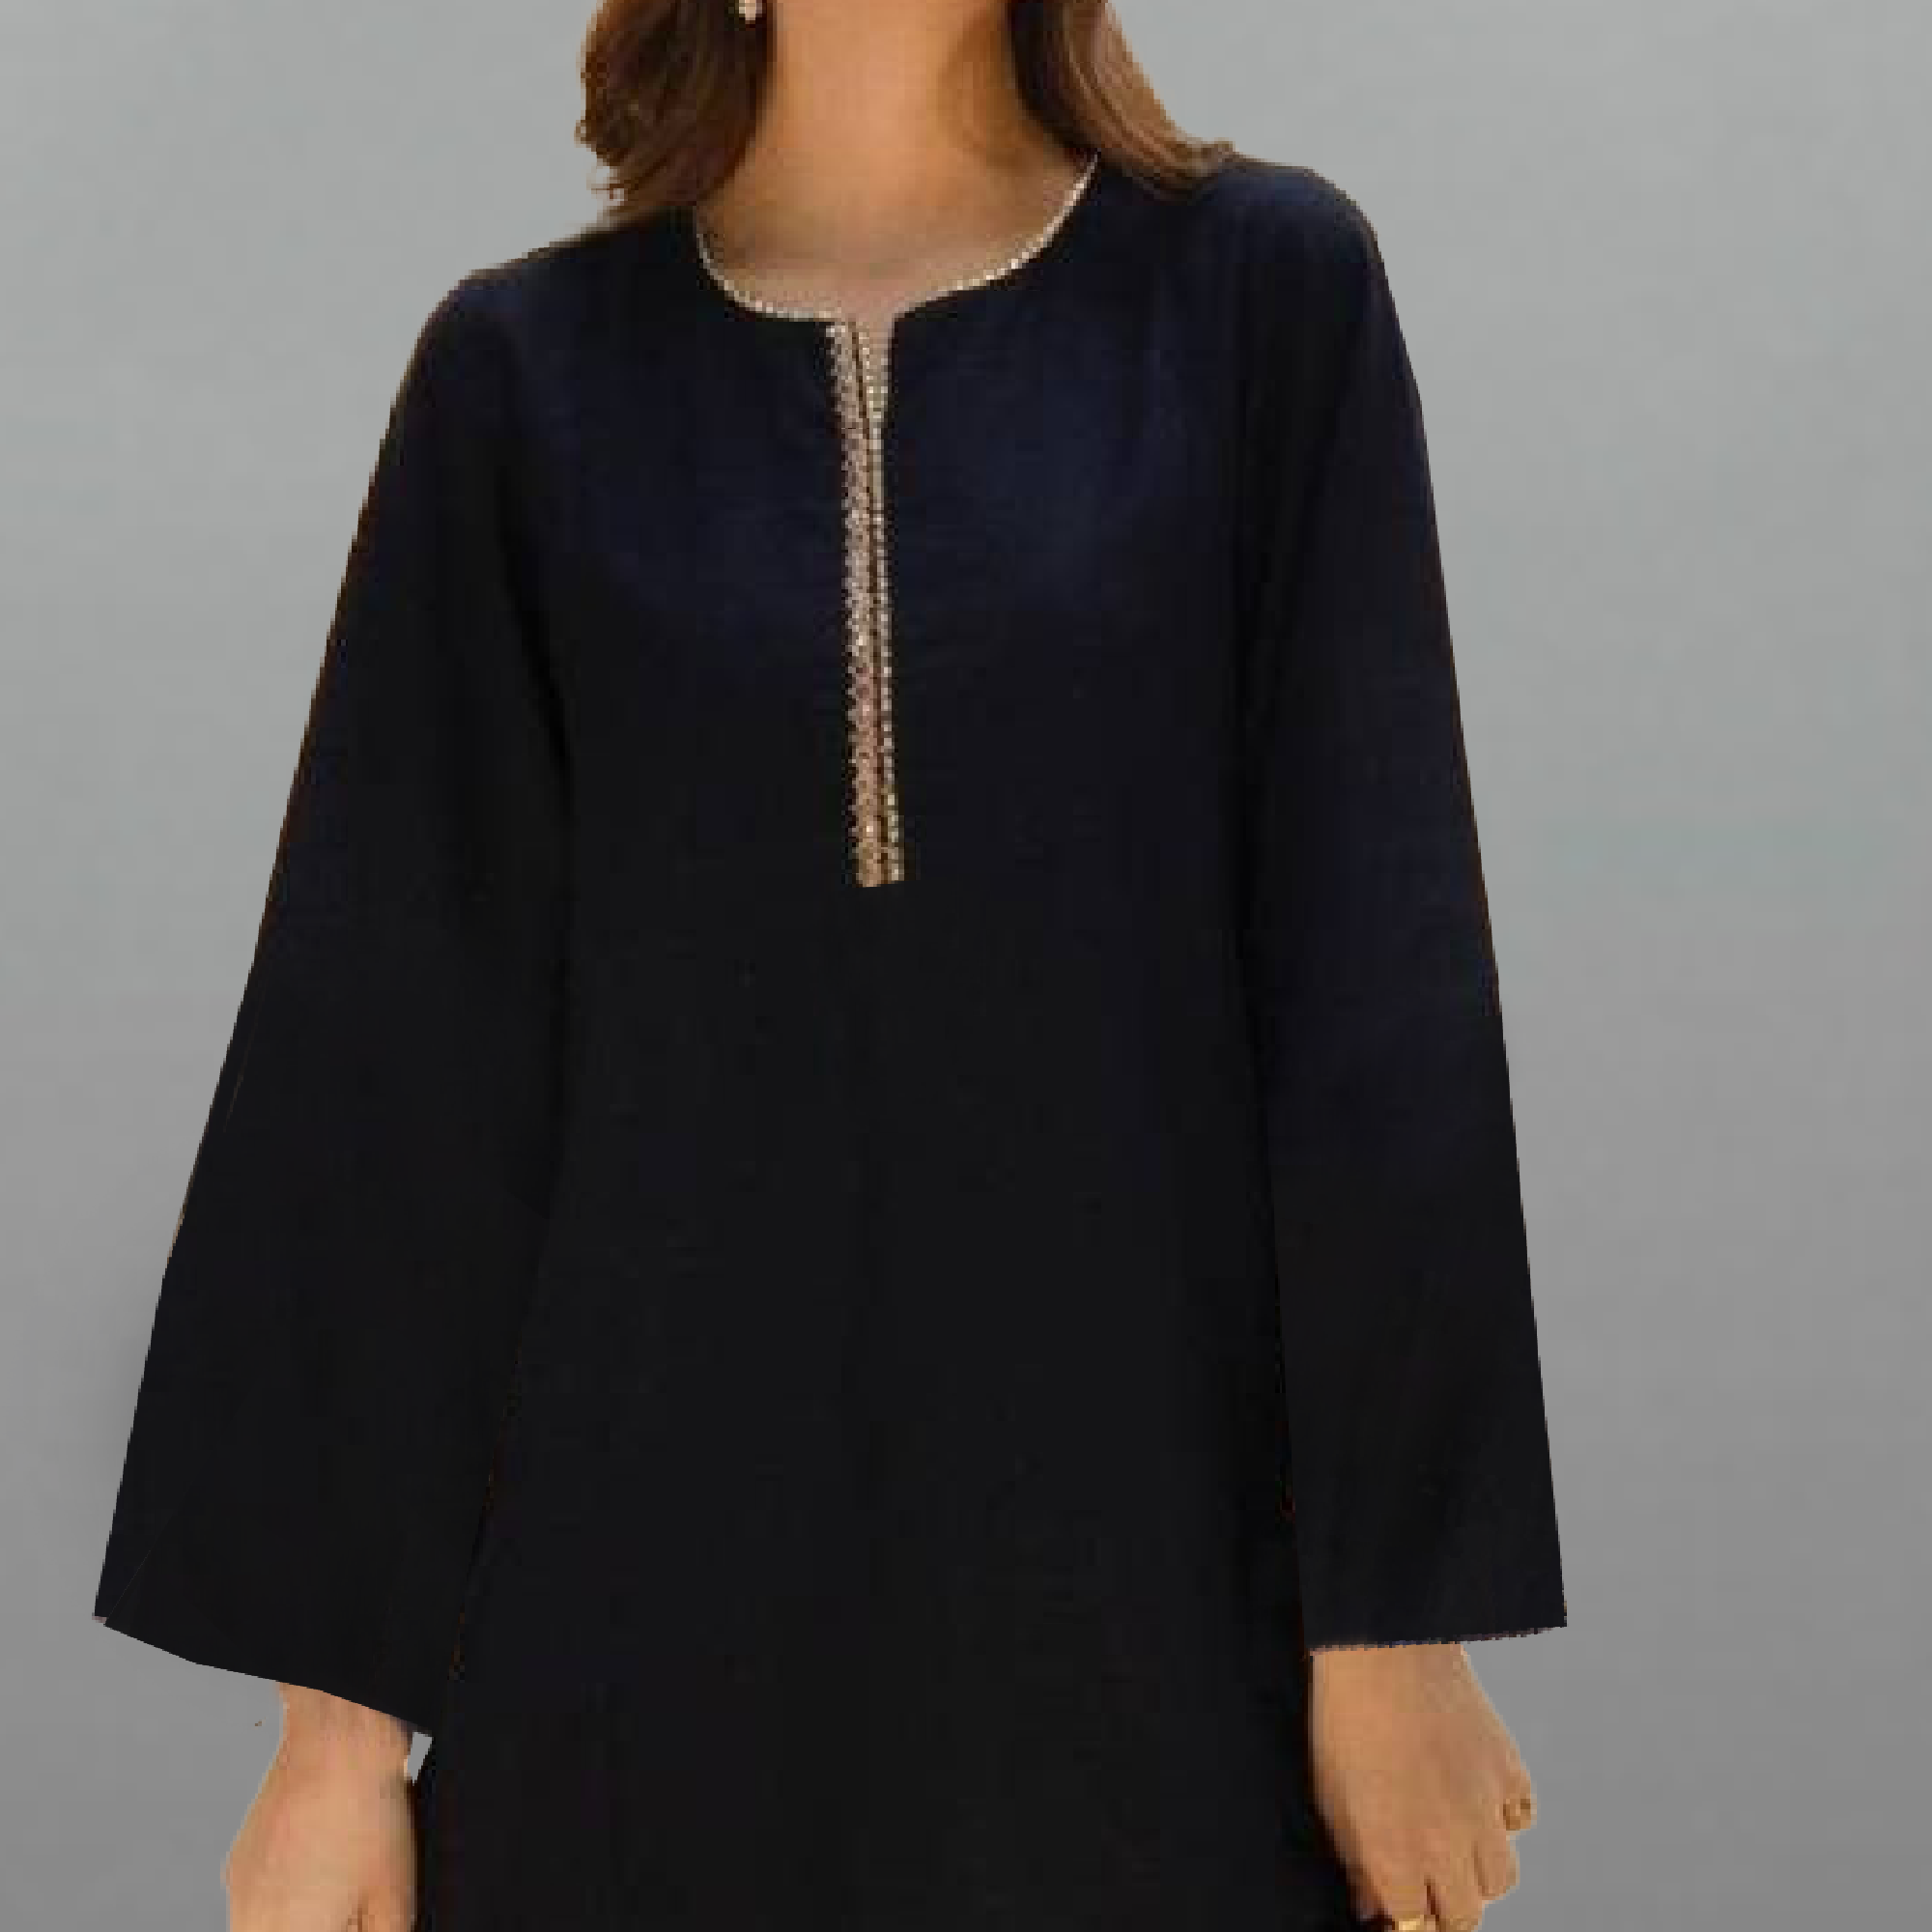 Women's Dark Blue Kurti set with Lace and Embroidery work-RWKS087